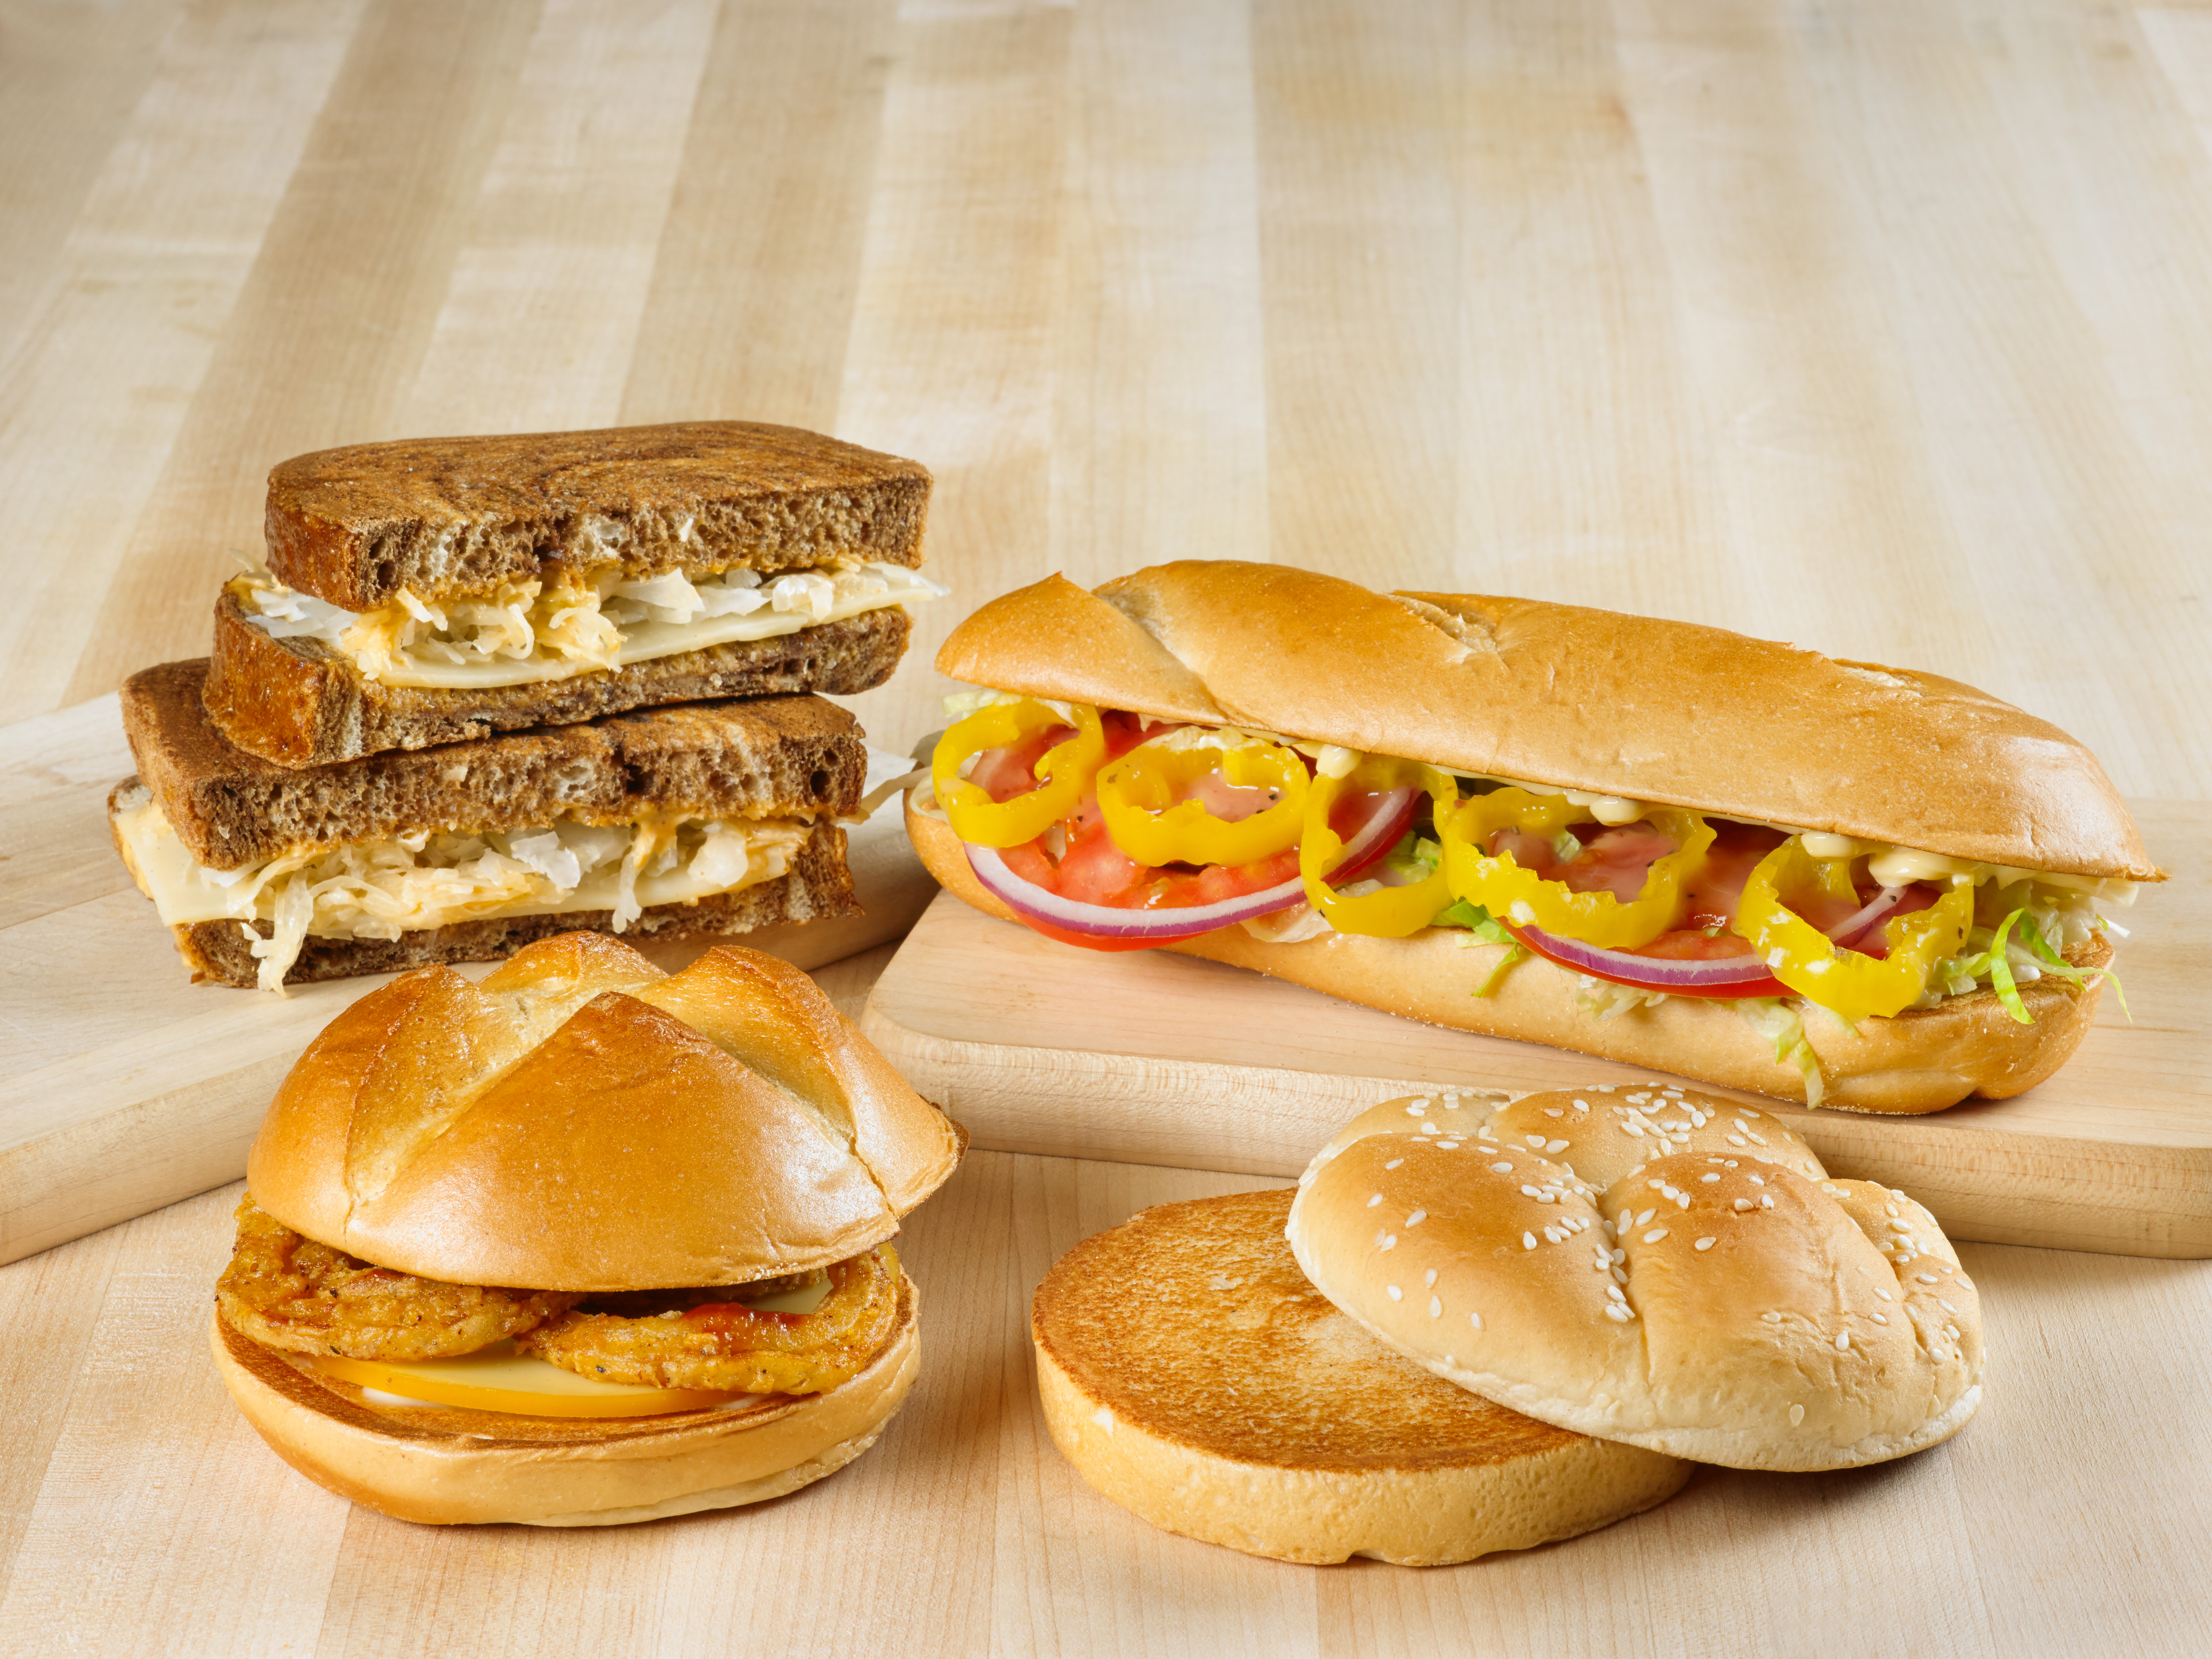 Arby’s Offering A Vegetarian Menu… For One Day Only